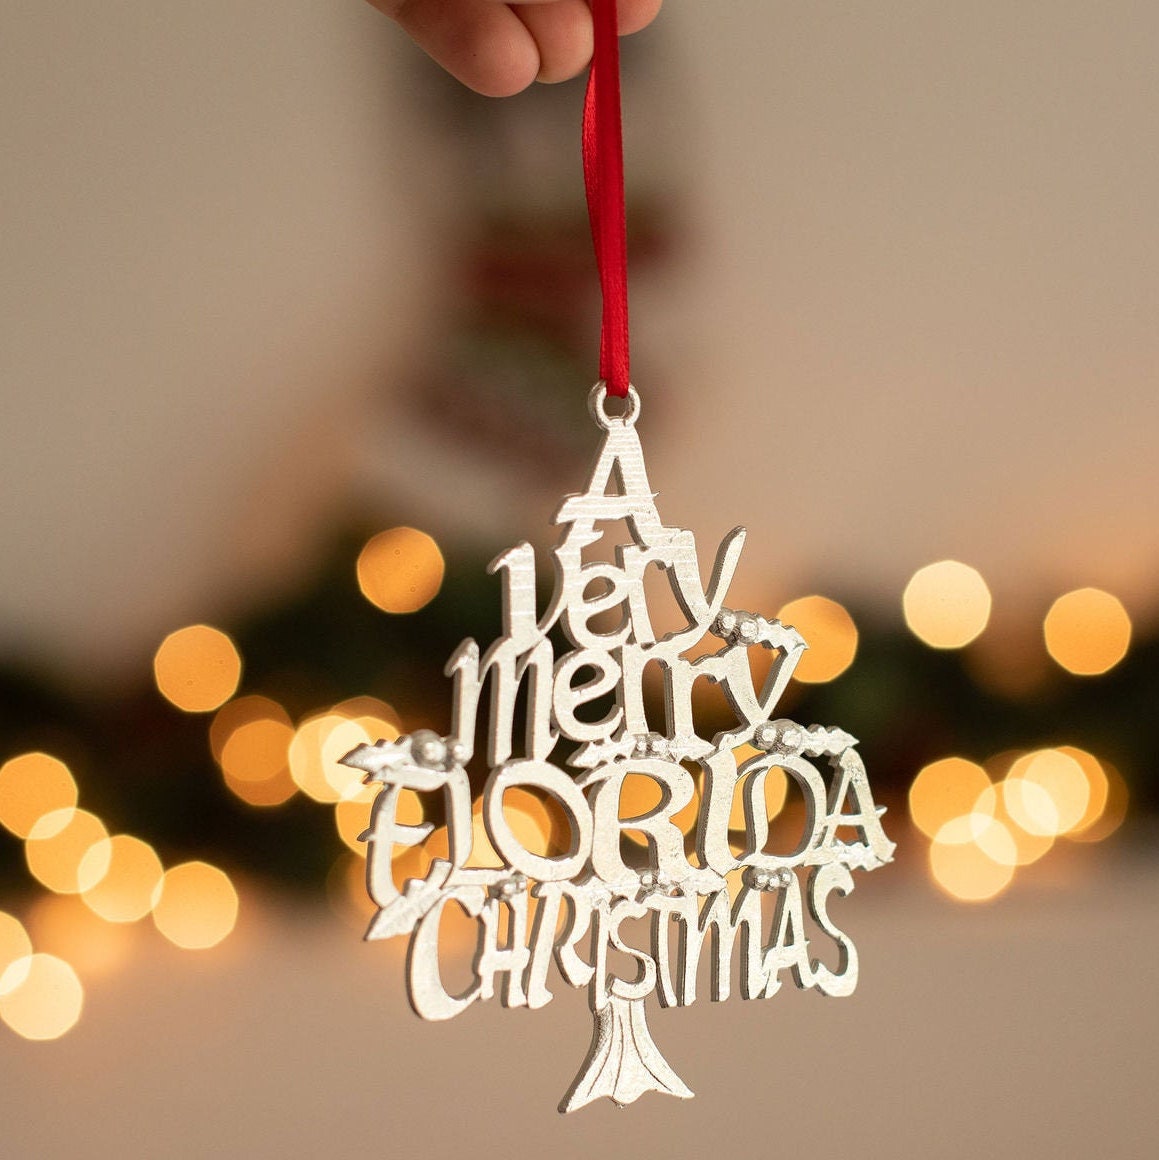 Florida Christmas Ornament Sunshine State Tree Decorations by Christmas Market Ornaments